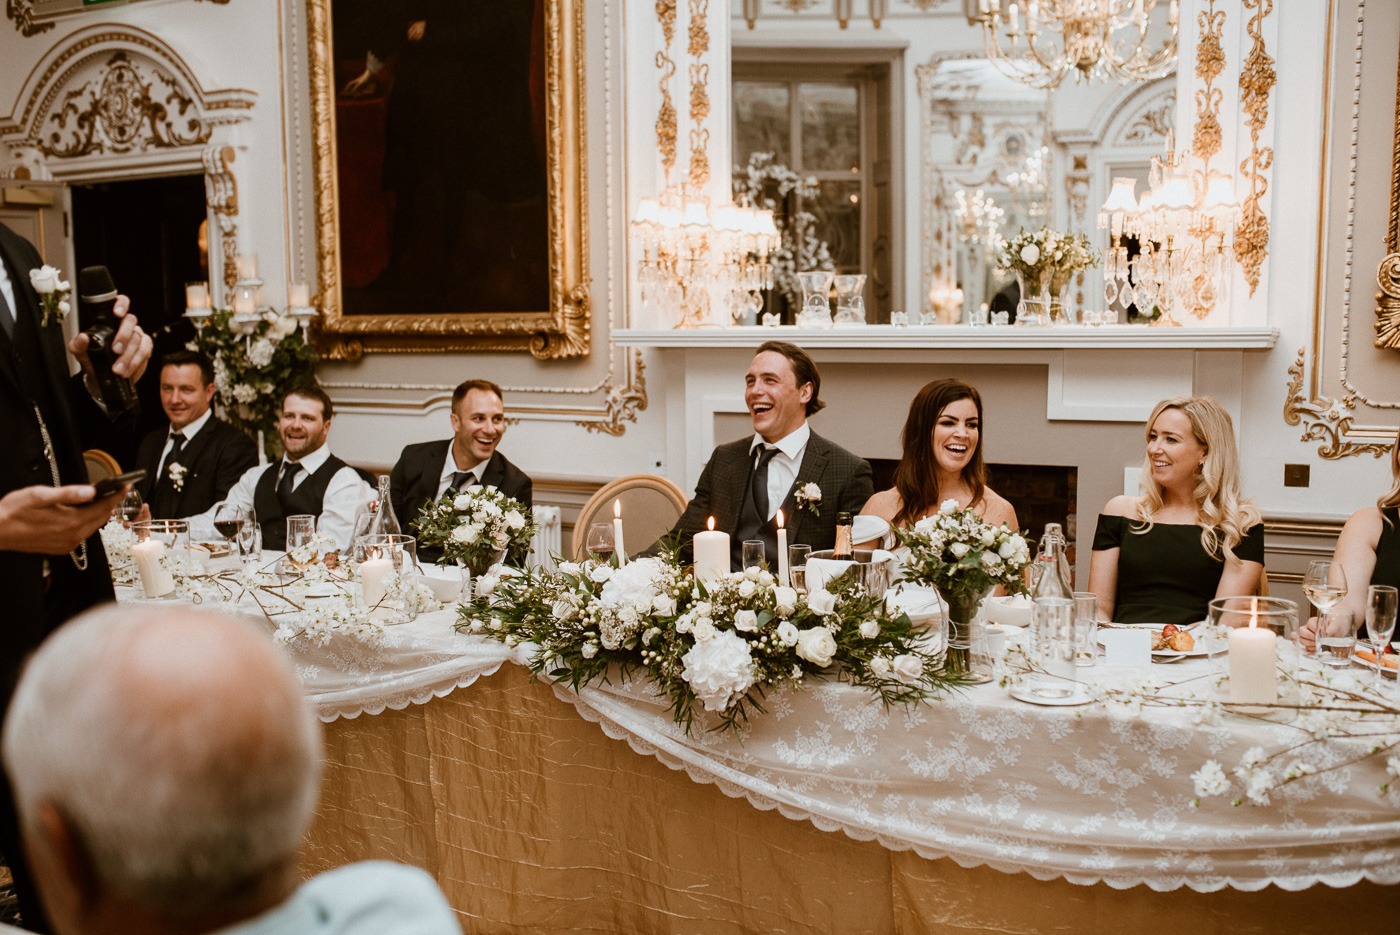 A group of people sitting at a table in front of a wedding cake